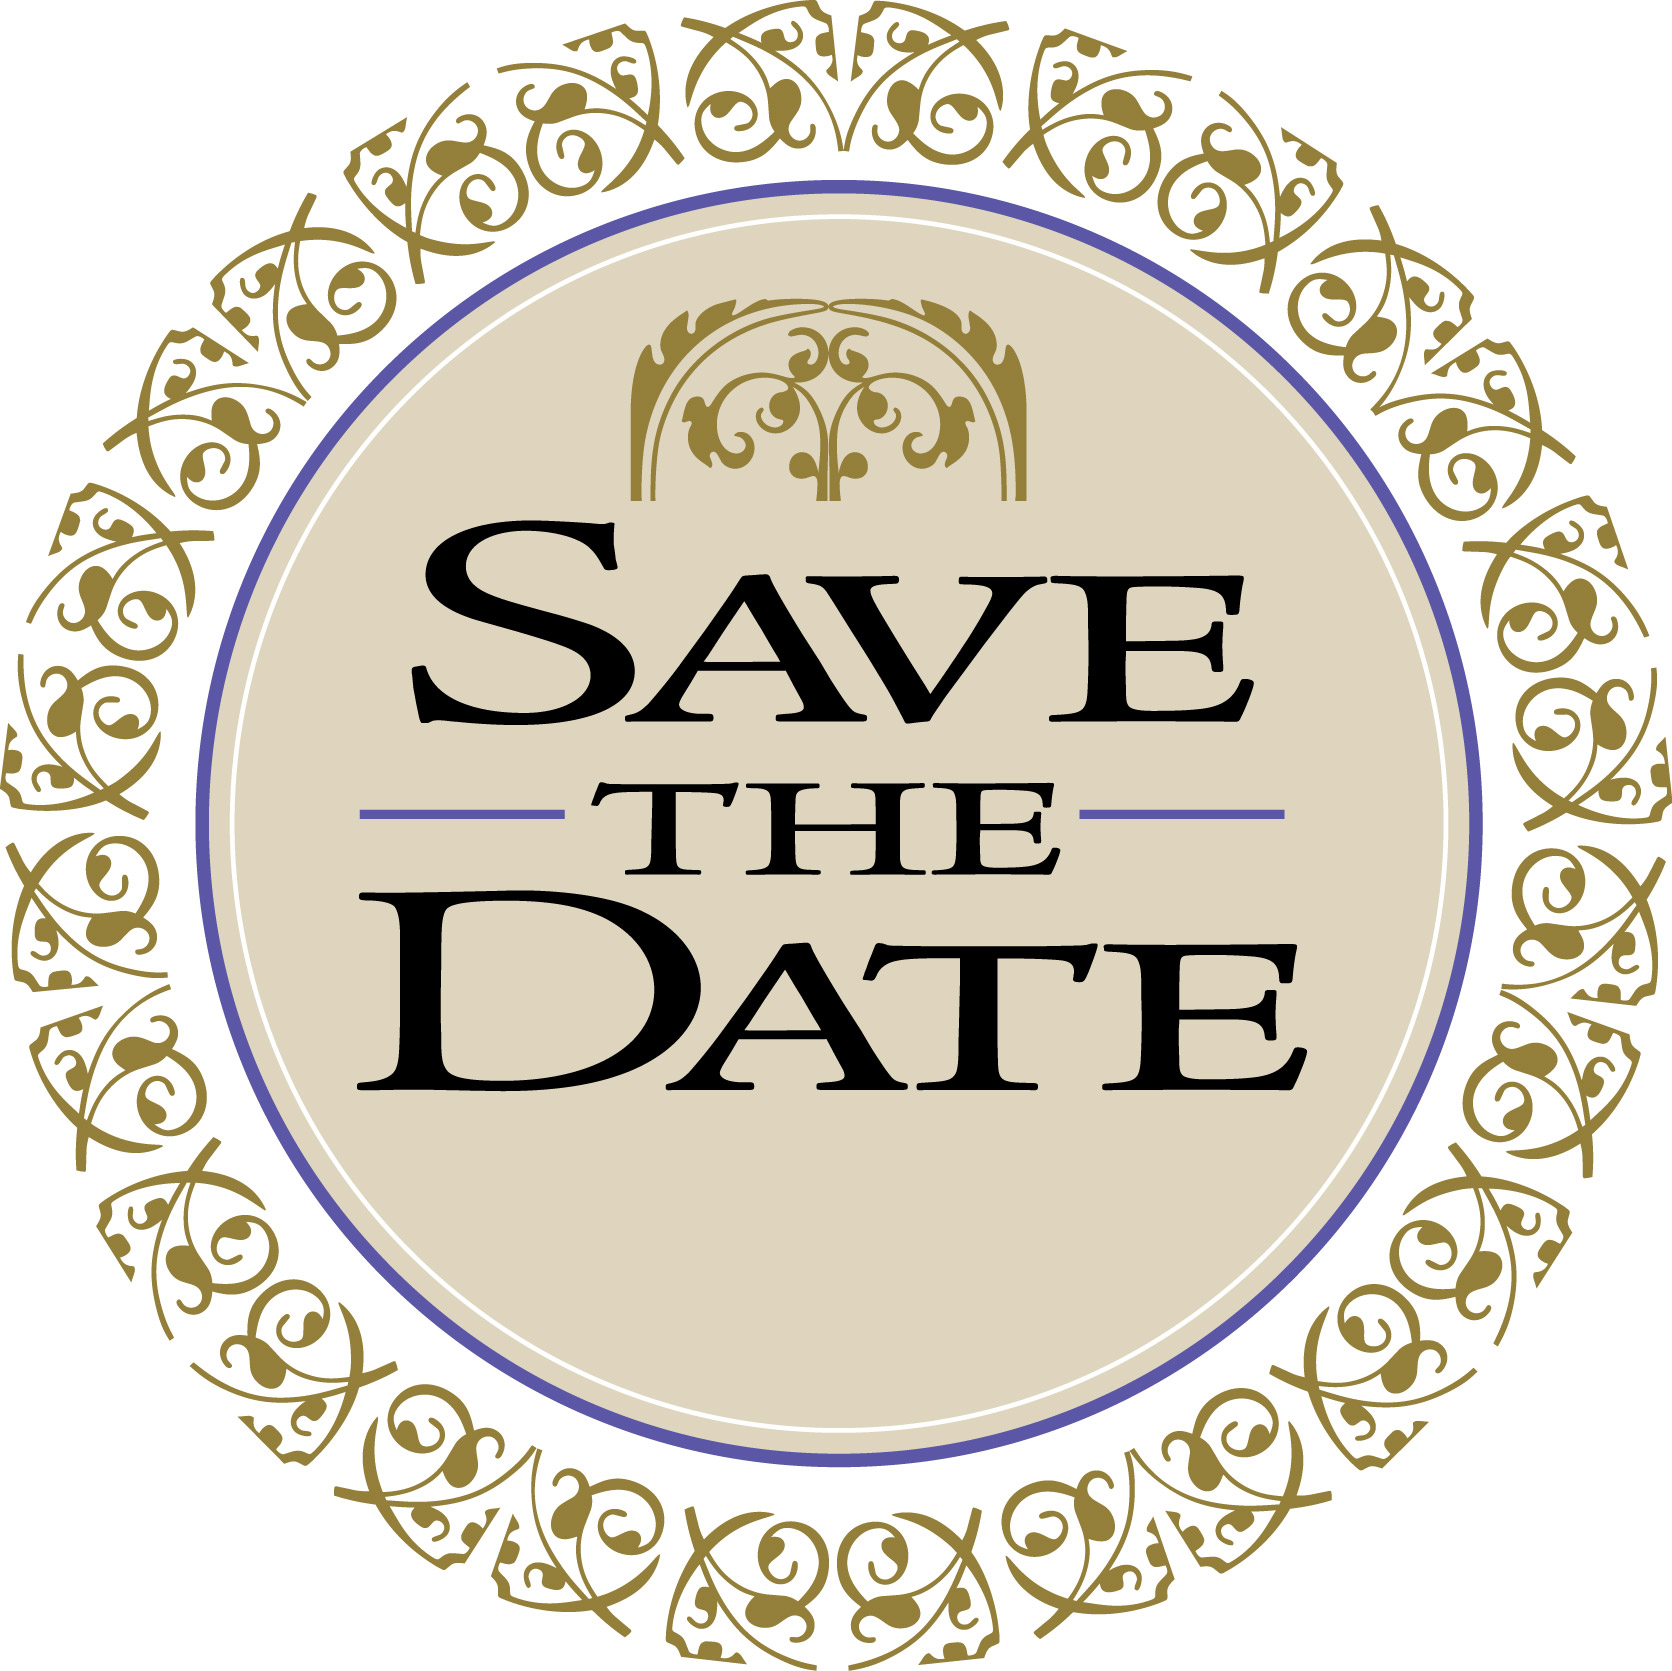 Save the date clipart 6